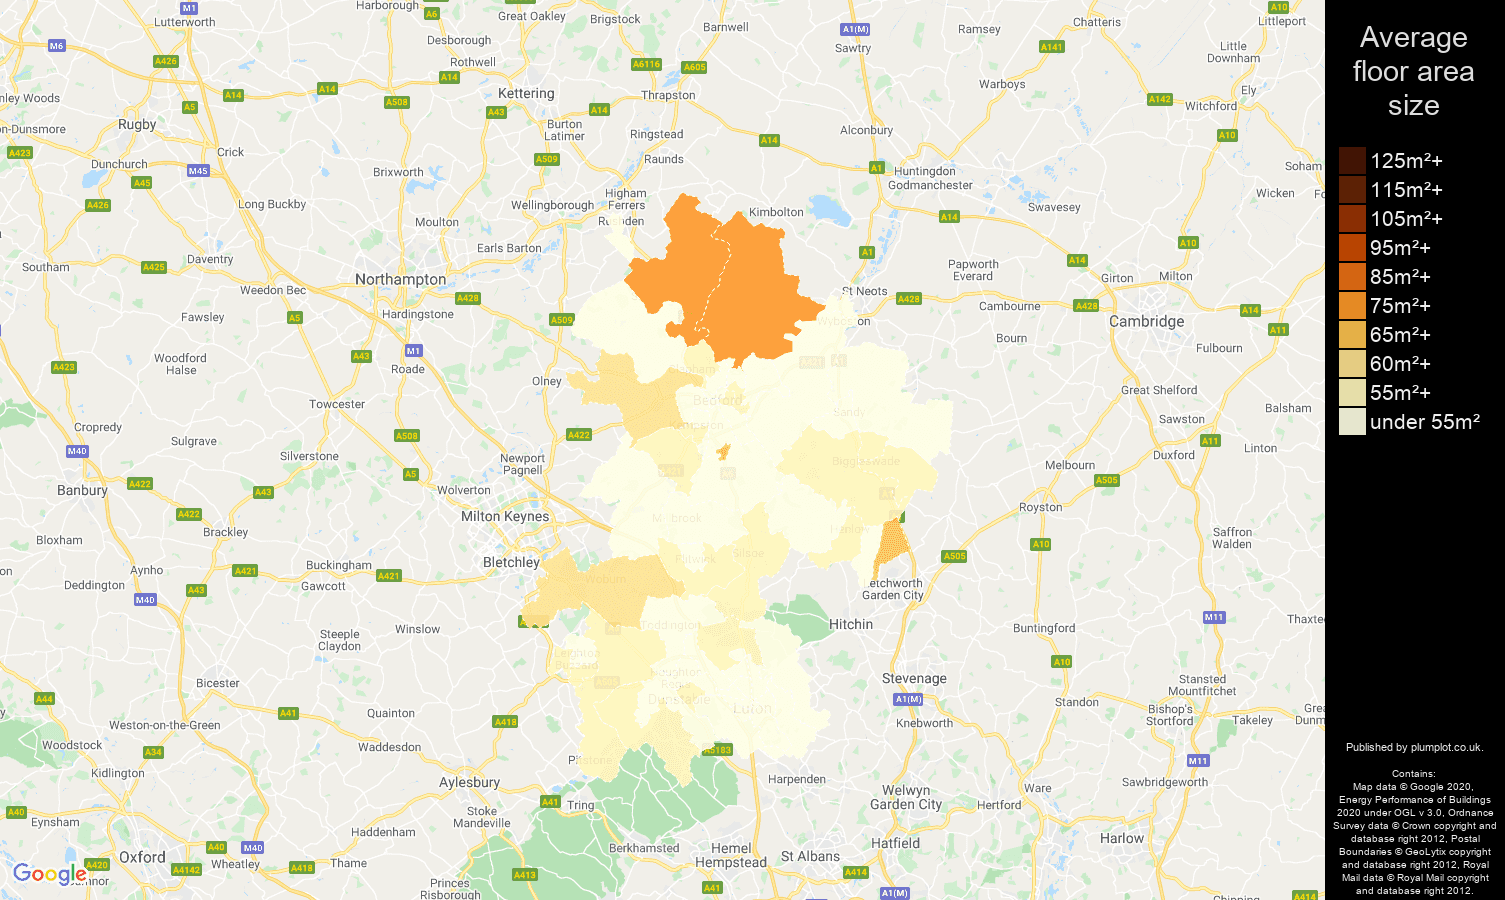 Bedfordshire map of average floor area size of flats